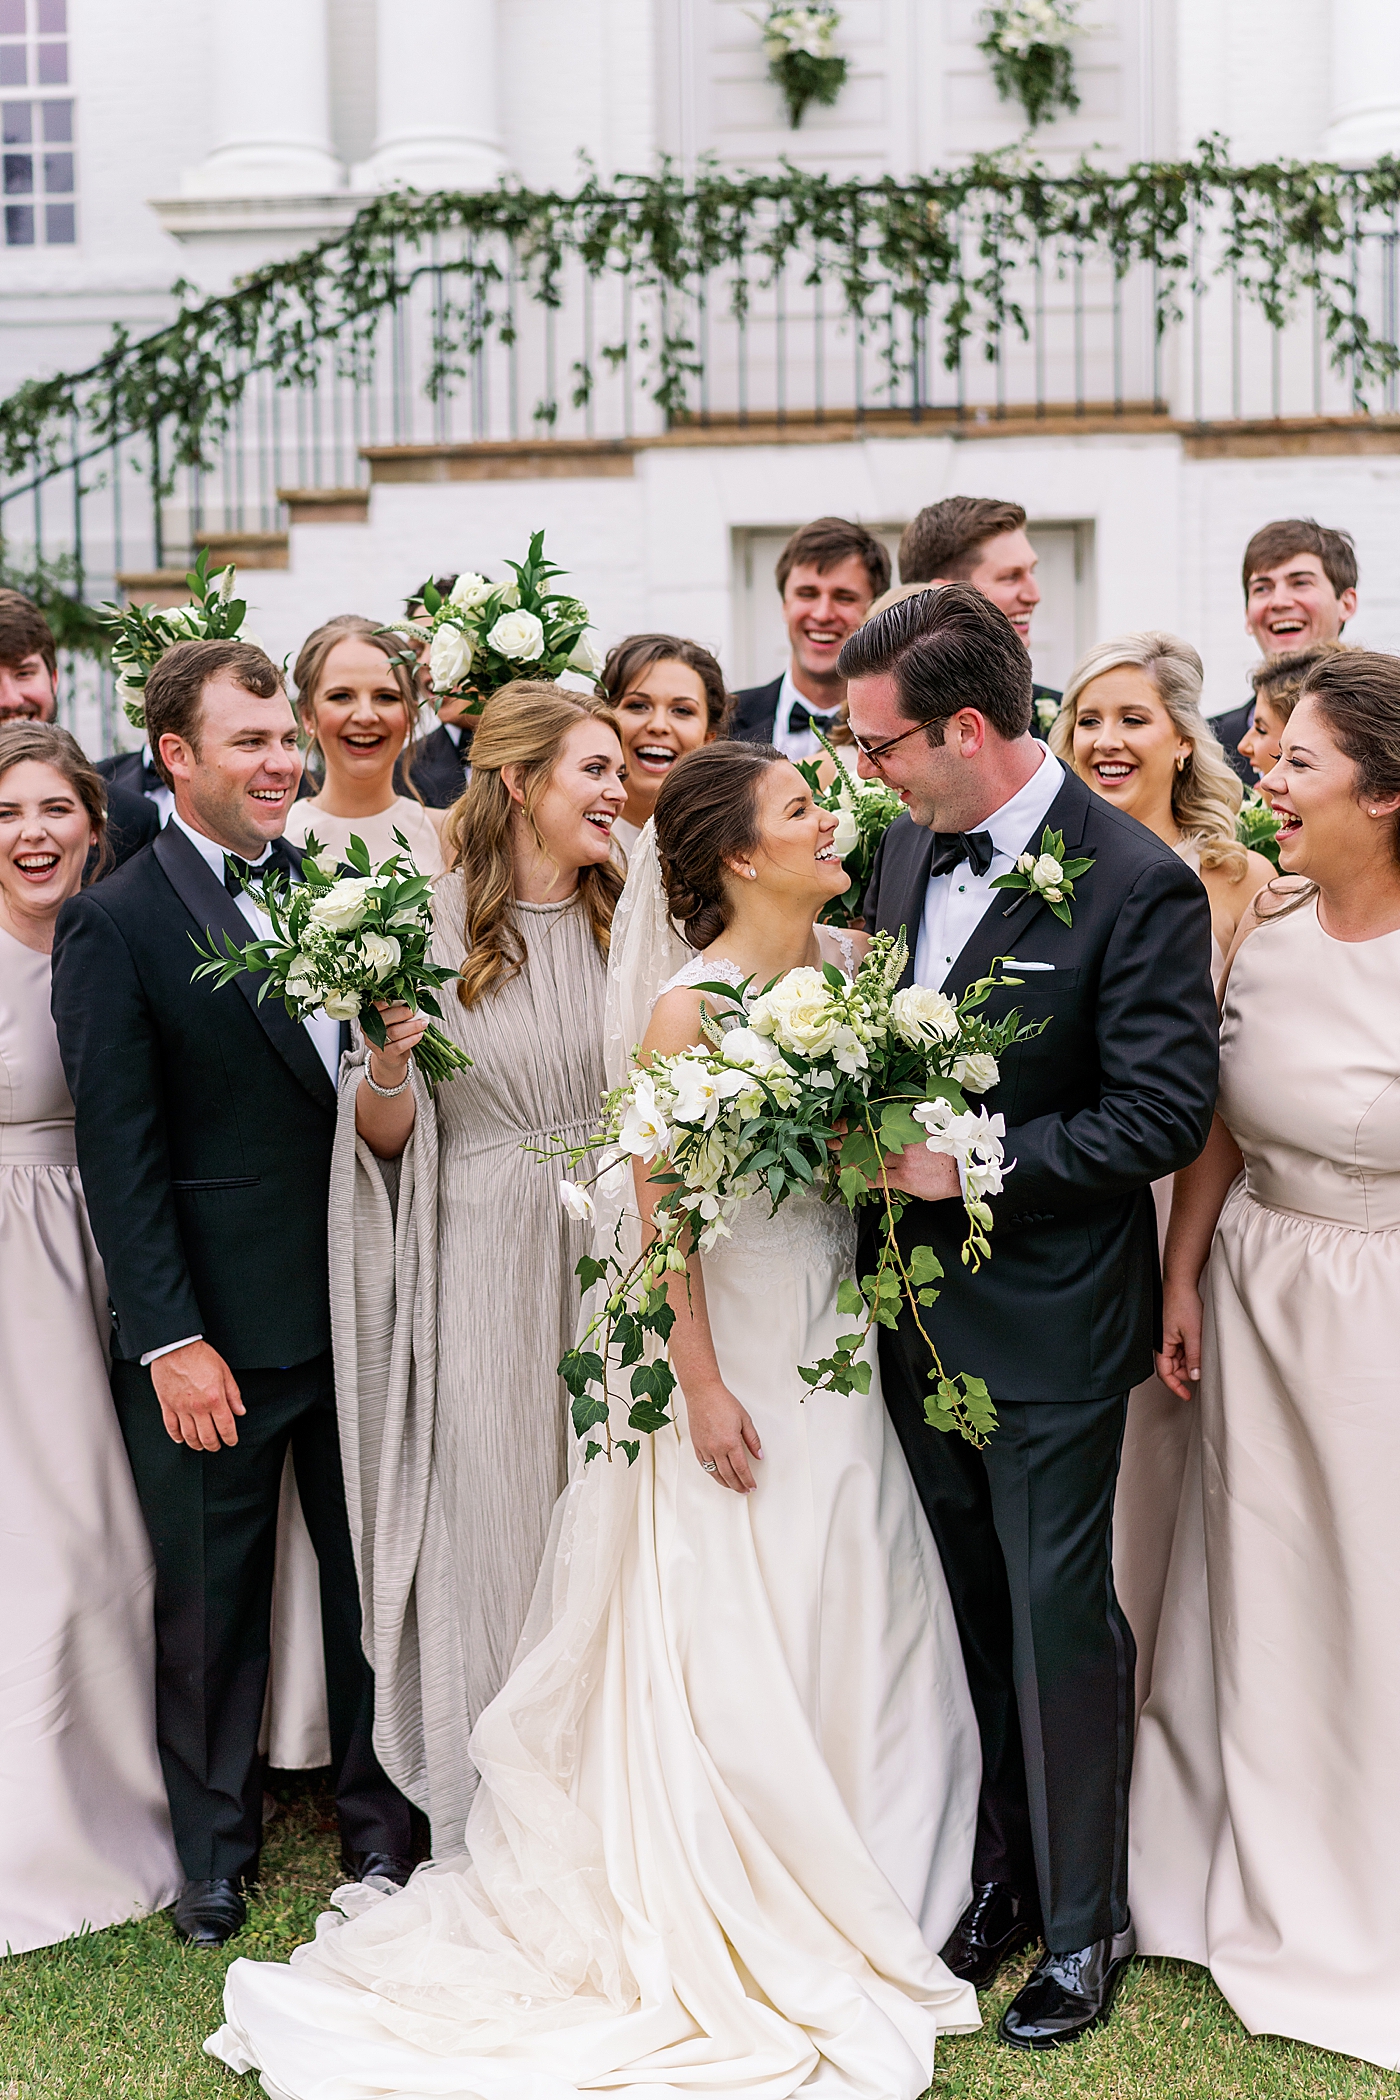 Bride and groom laughing together with their bridal party during their Timeless Country Club Wedding | Photo by Annie Laura Photography